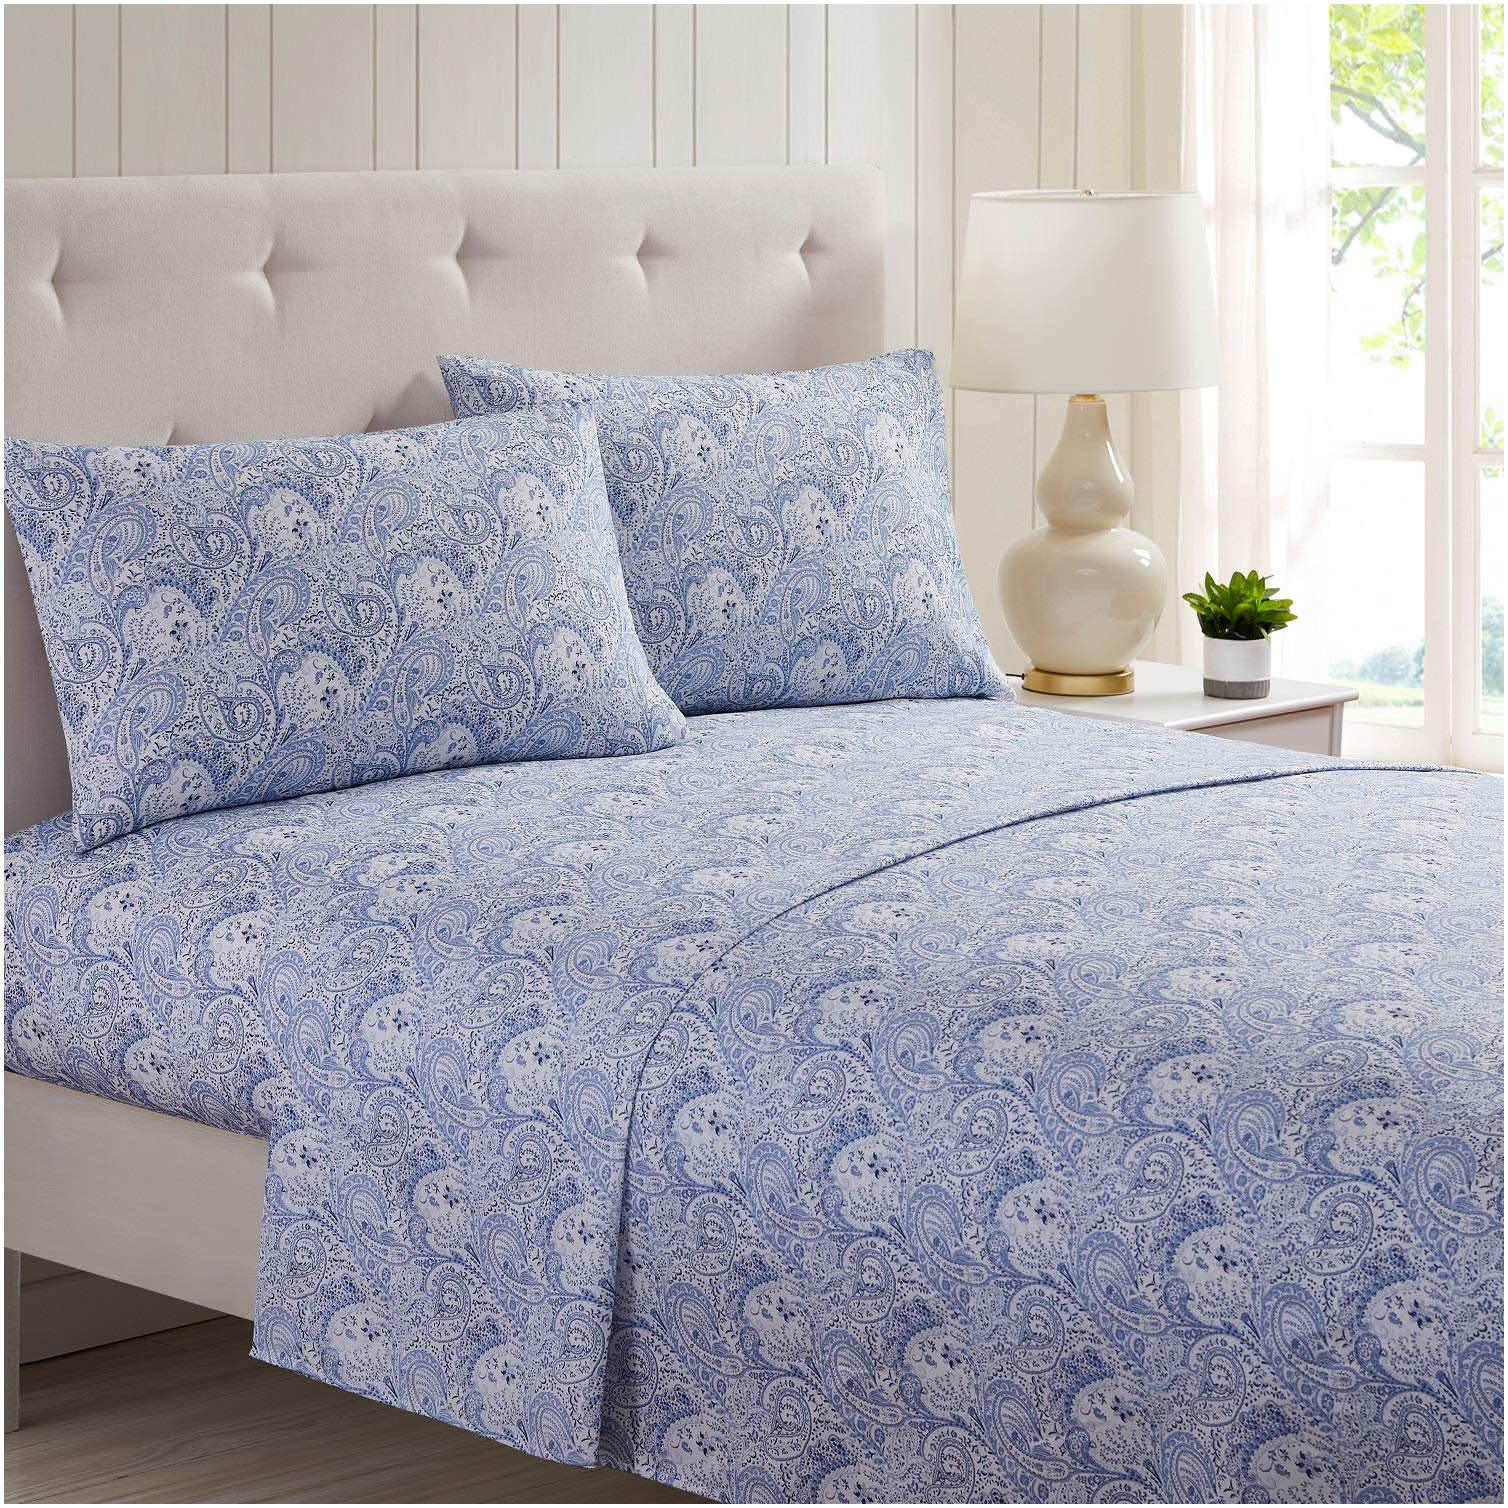 Book Cover Mellanni King Size Sheet Set - Hotel Luxury 1800 Bedding Sheets & Pillowcases - Extra Soft Cooling Bed Sheets - Deep Pocket up to 16 inch Mattress - Easy Care - 4 Piece (King, Paisley Blue)